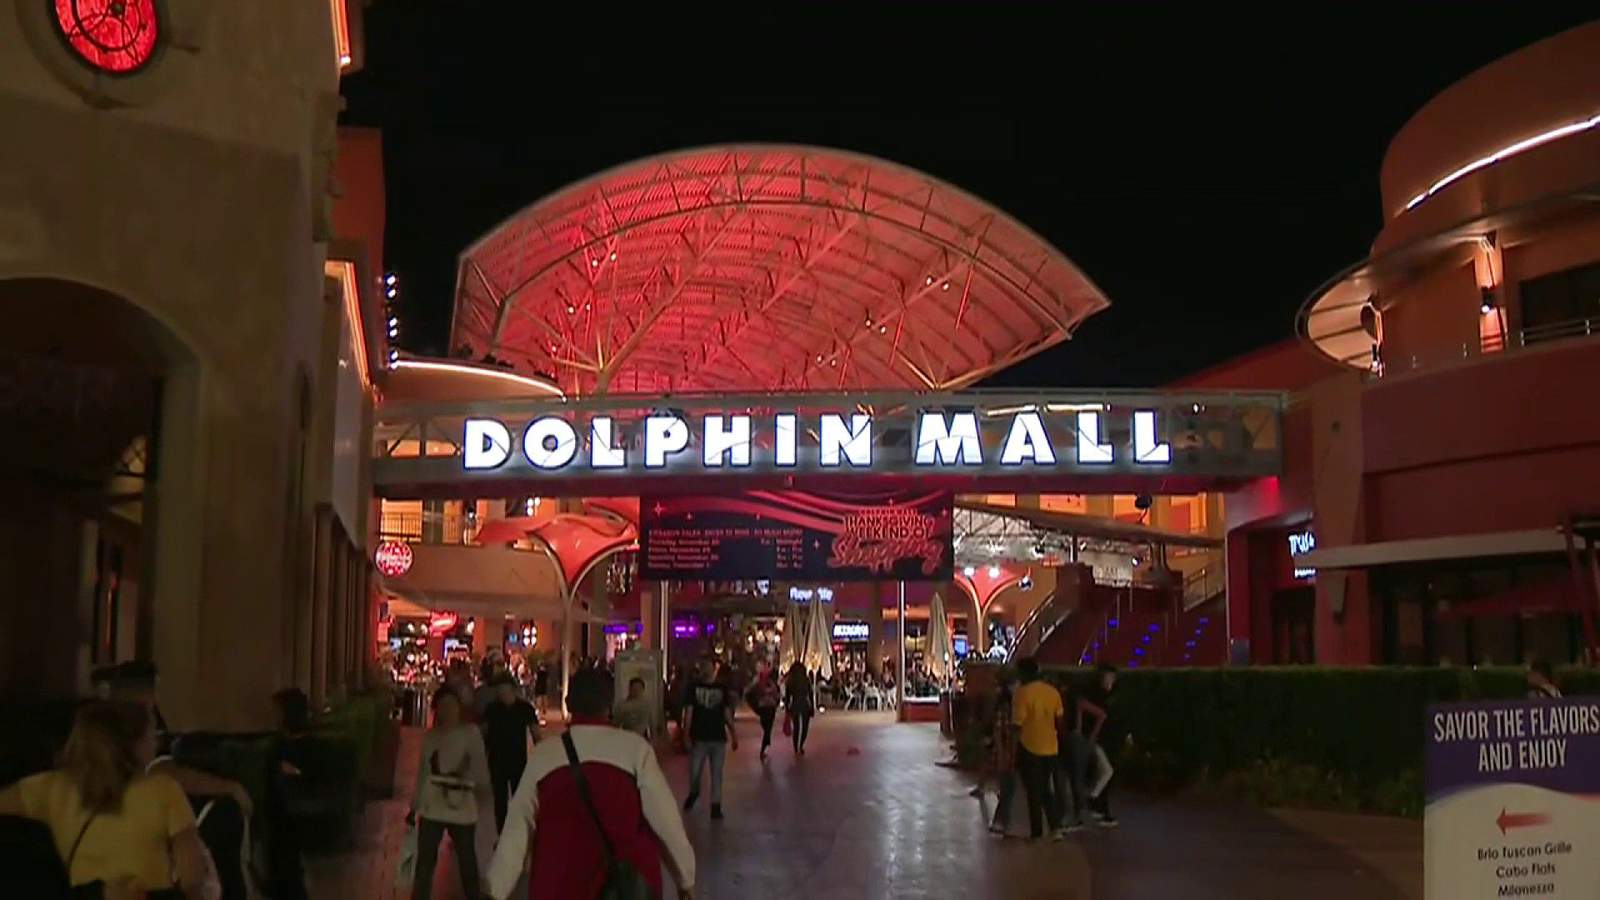 COVID-19 patient reports visiting Miami-Dade’s Dolphin Mall Sunday